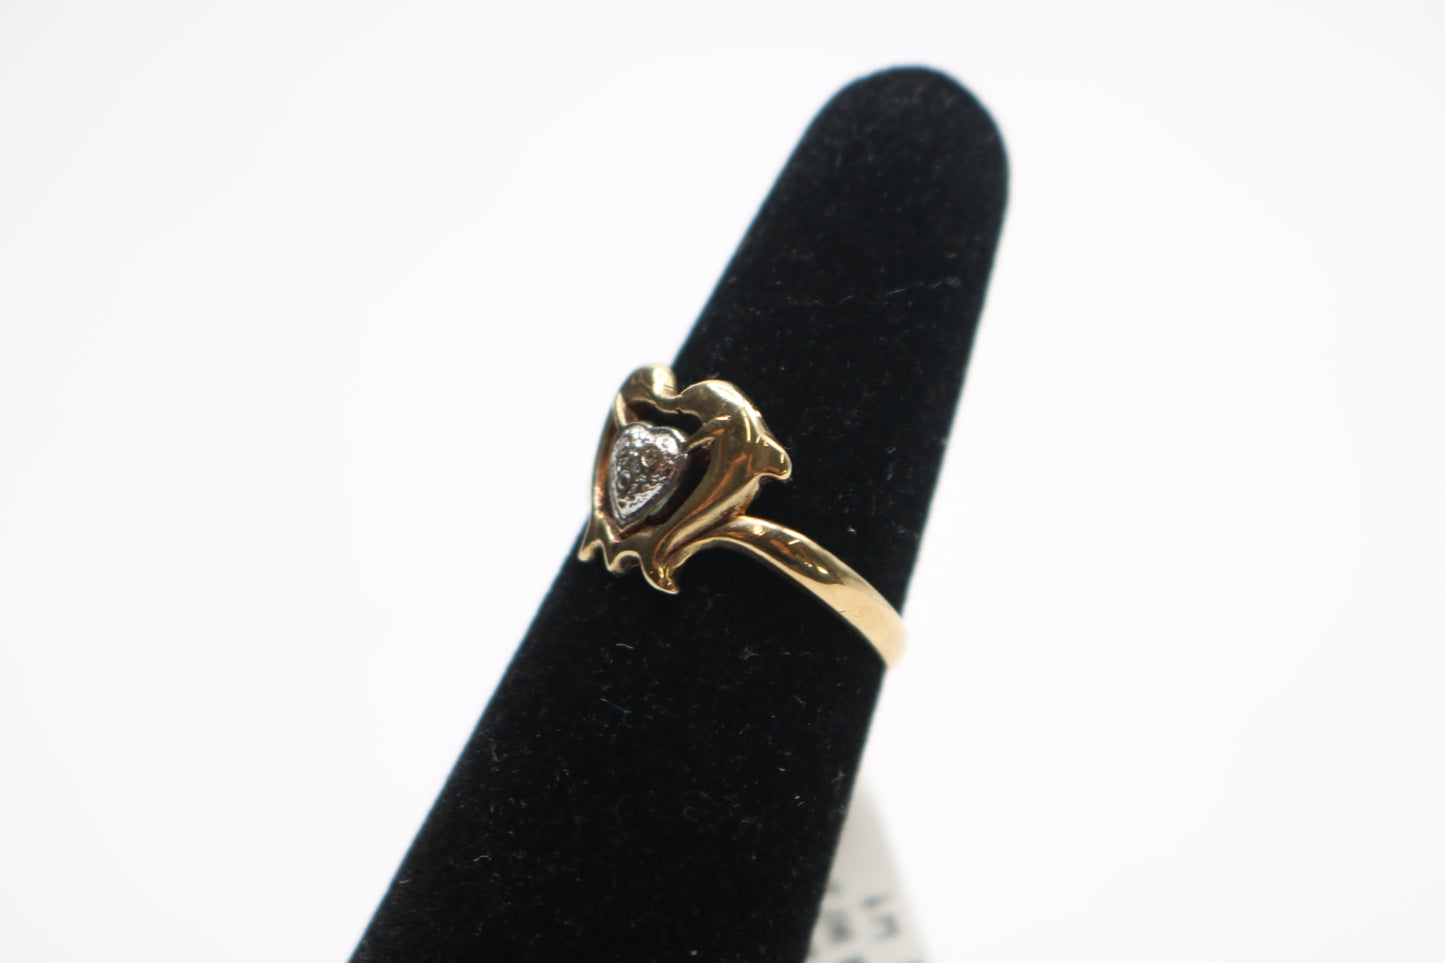 10k Two Tone Heart Shaped Ring w/3 Clear Stone (Size 6 1/4)